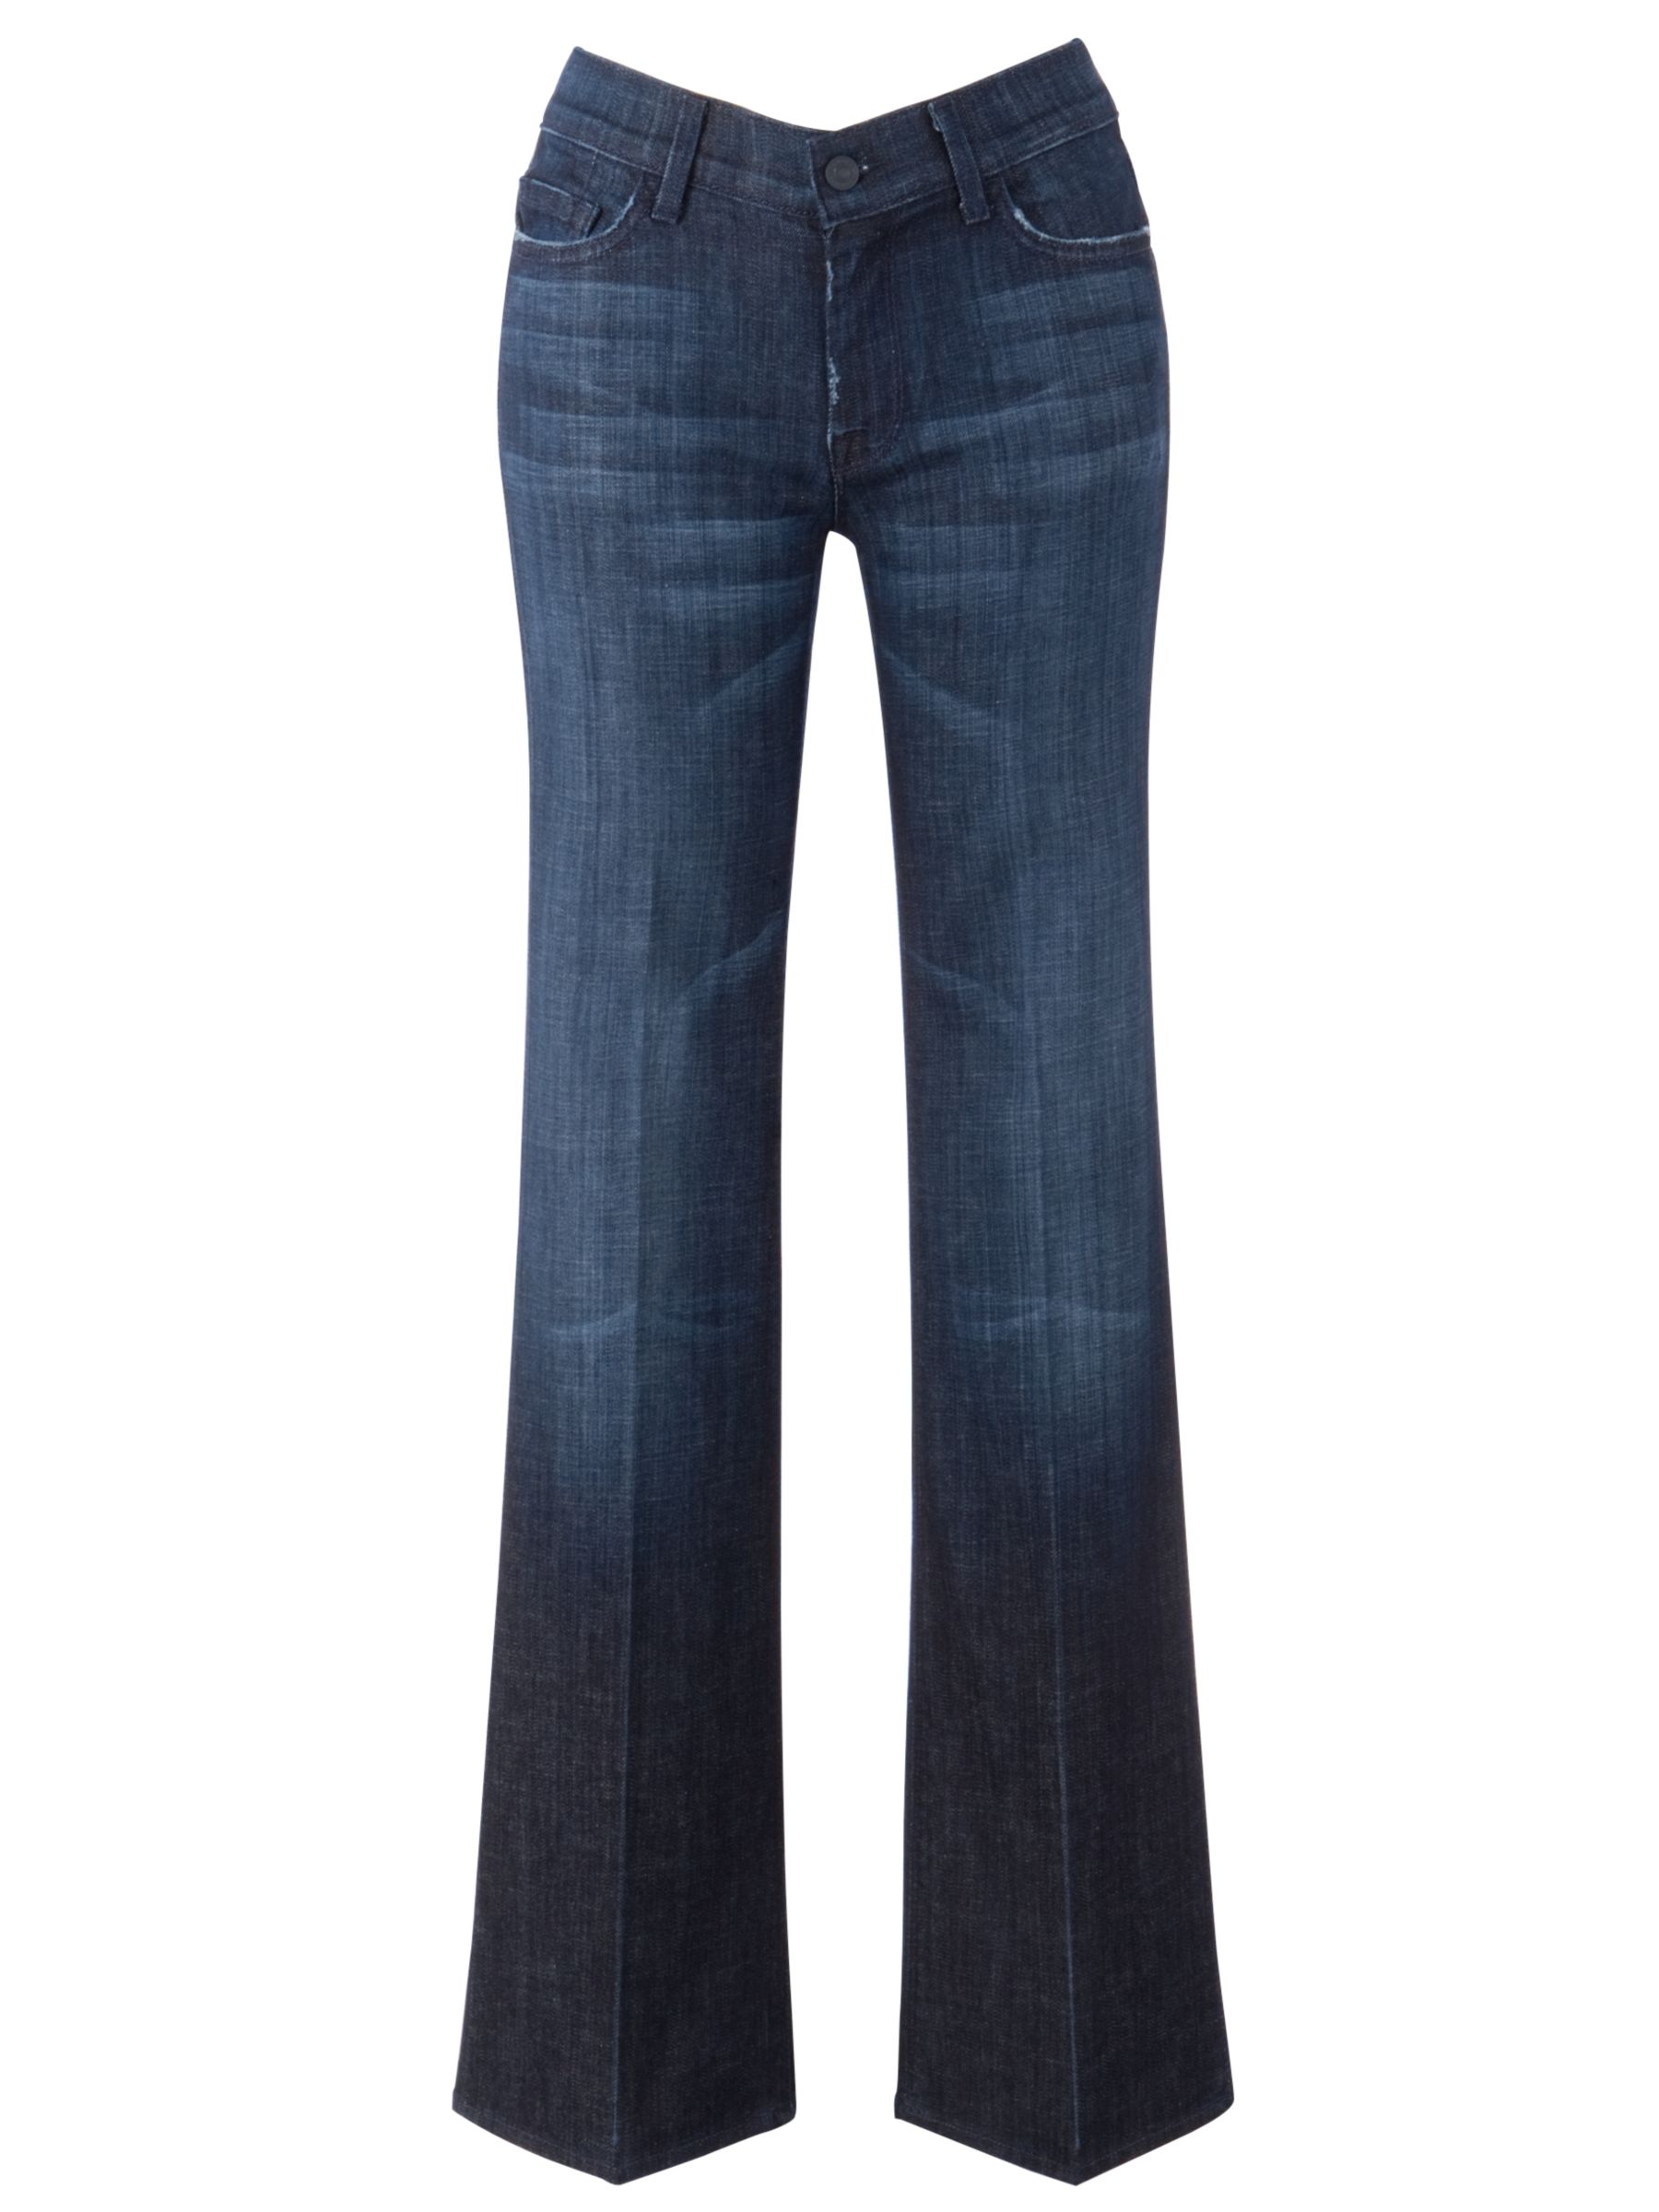 7 For All Mankind High Waist Bootcut Jeans, Dark at John Lewis